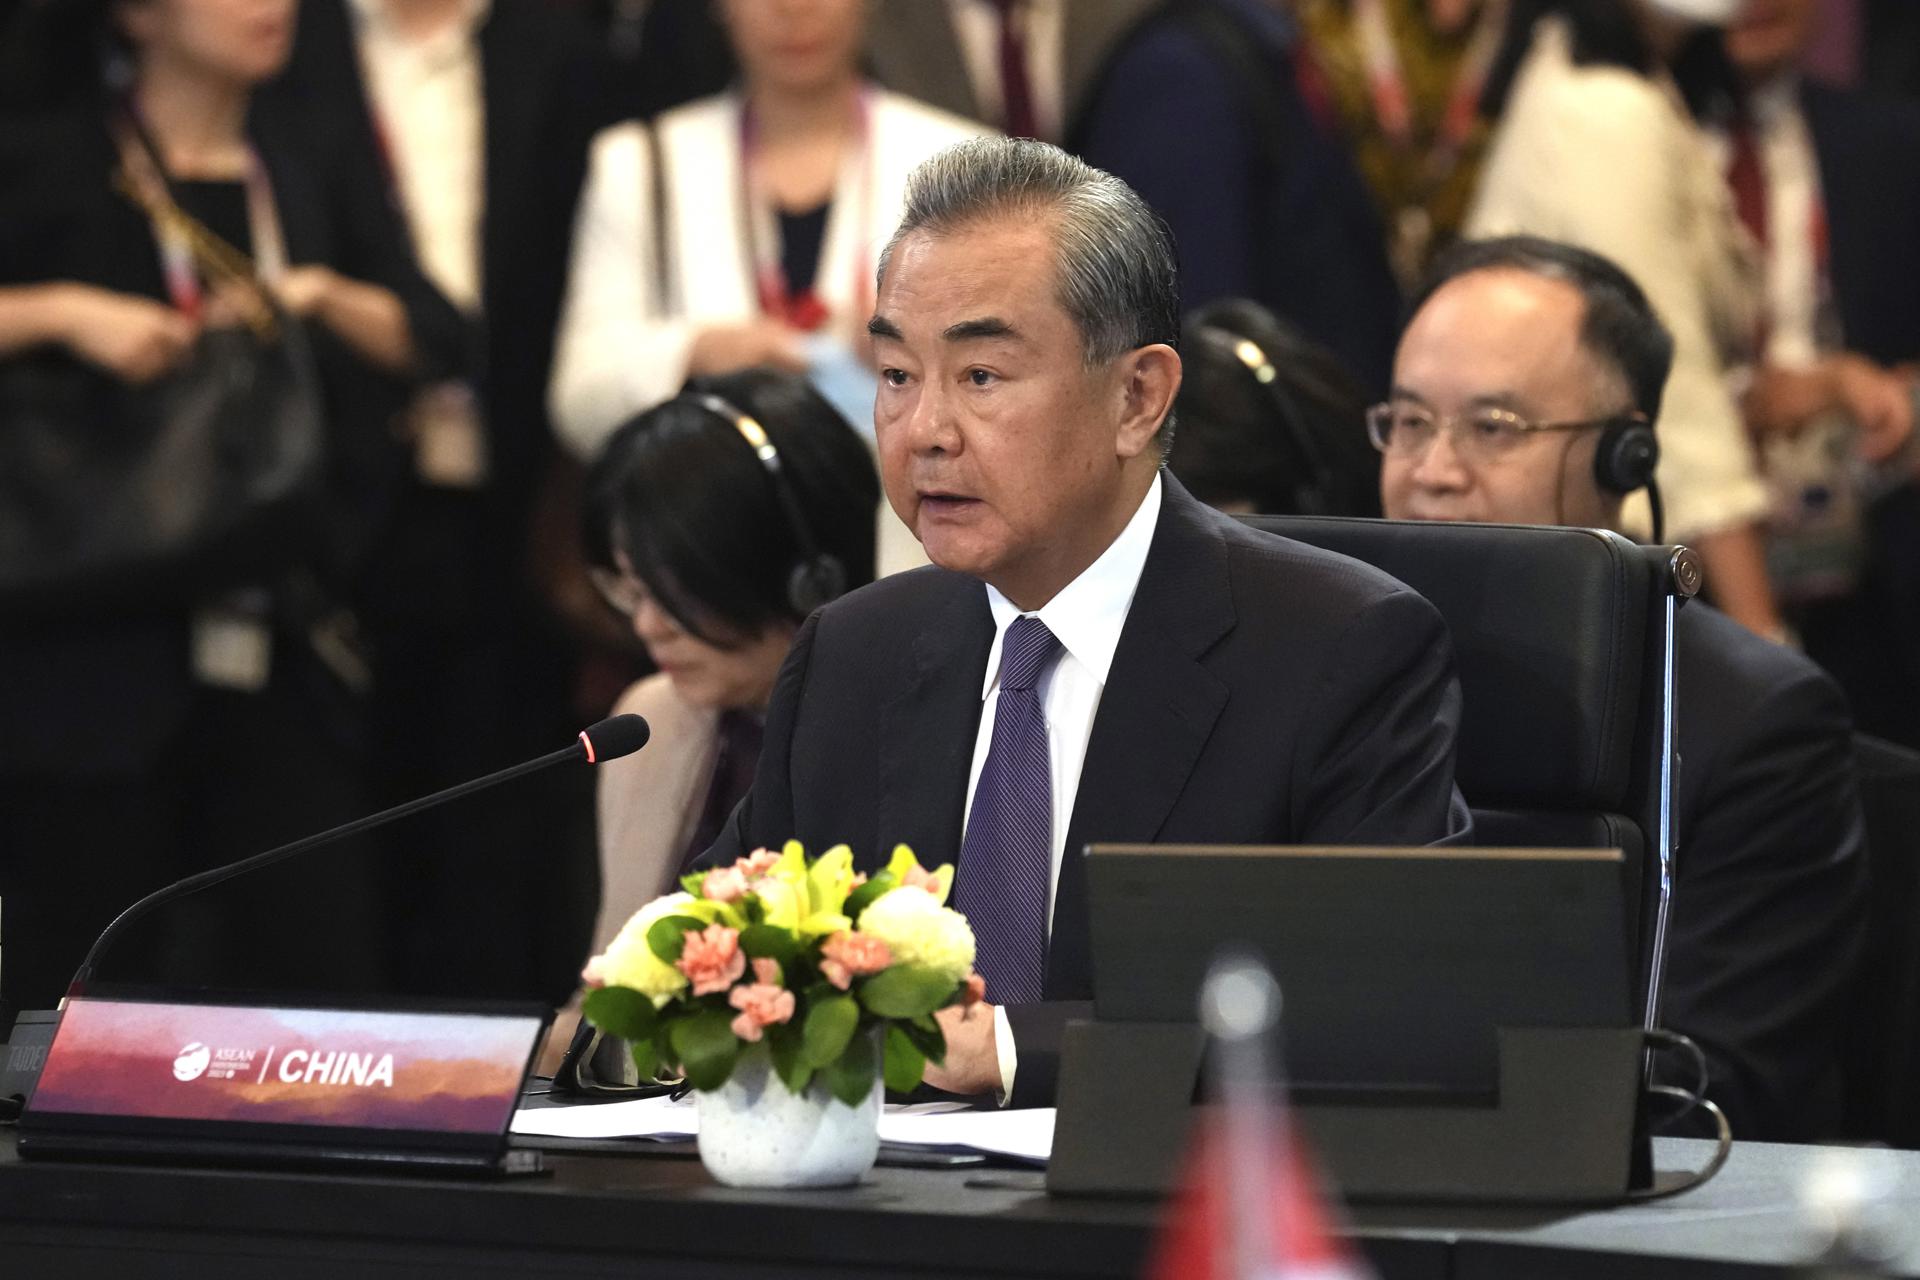 Chinese Communist Party's foreign policy chief Wang Yi speaks during the ASEAN Post Ministerial Conference with China at the Association of Southeast Asian Nations (ASEAN) Foreign Ministers'Äô Meeting in Jakarta, Indonesia, 13 July 2023. Indonesia is hosting the 56th ASEAN foreign ministers'Äô meeting and related meetings from 08 to 14 July. EFE/EPA/TATAN SYUFLANA / POOL
